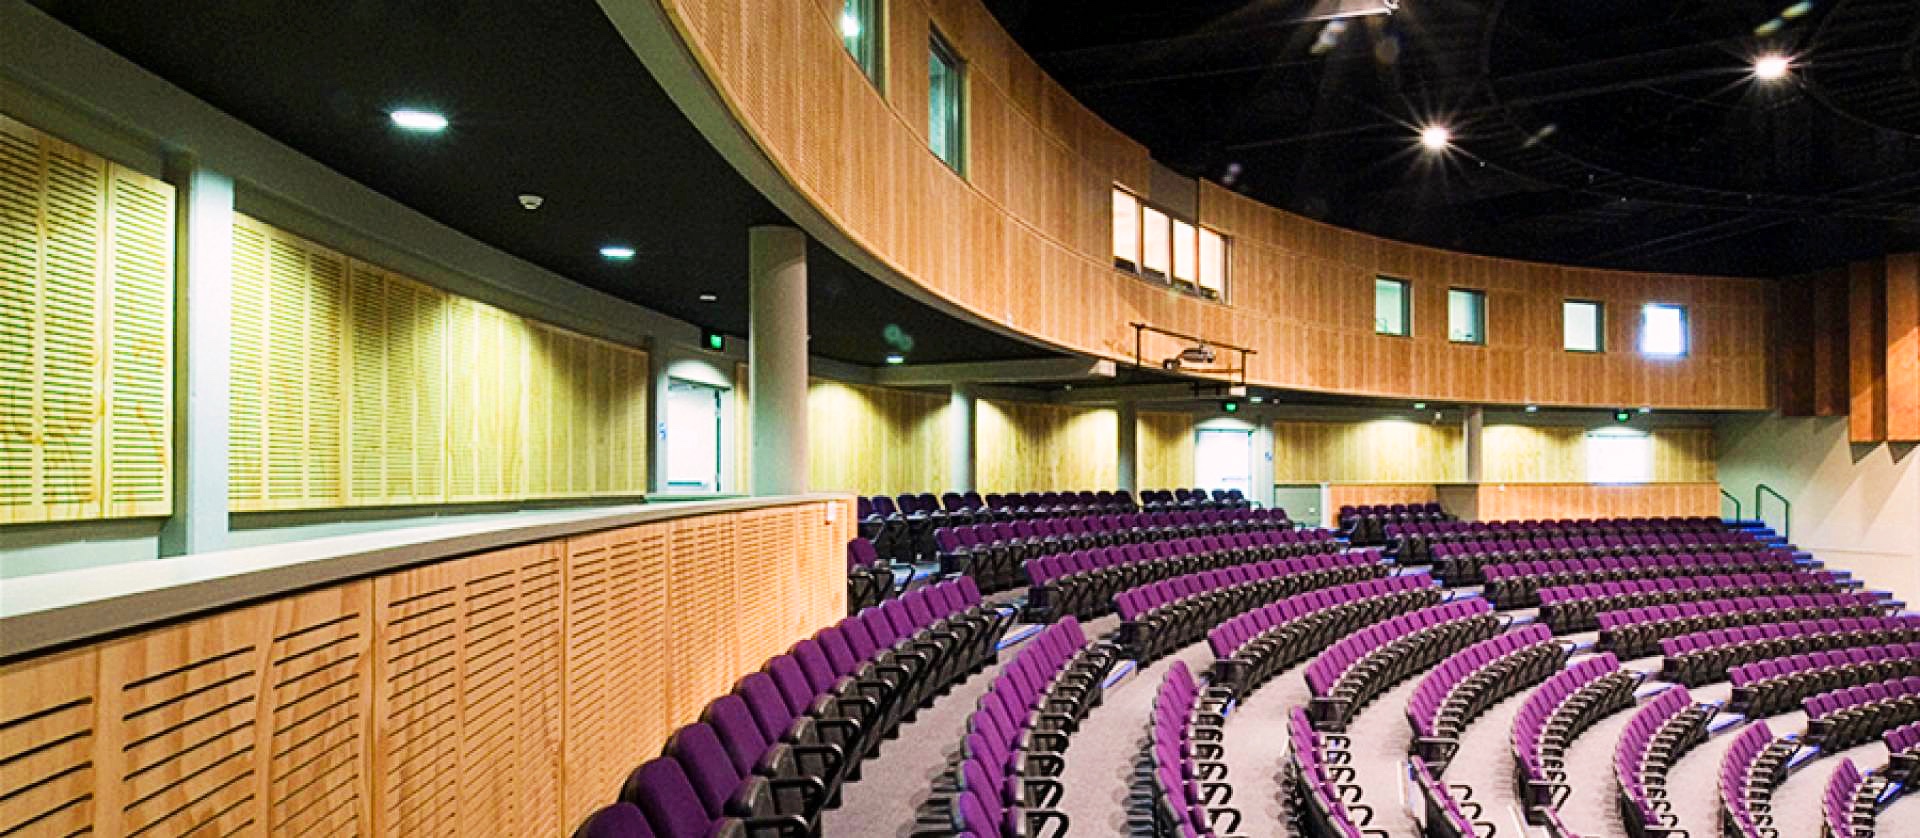 The Benefits of Acoustic Timber Panels